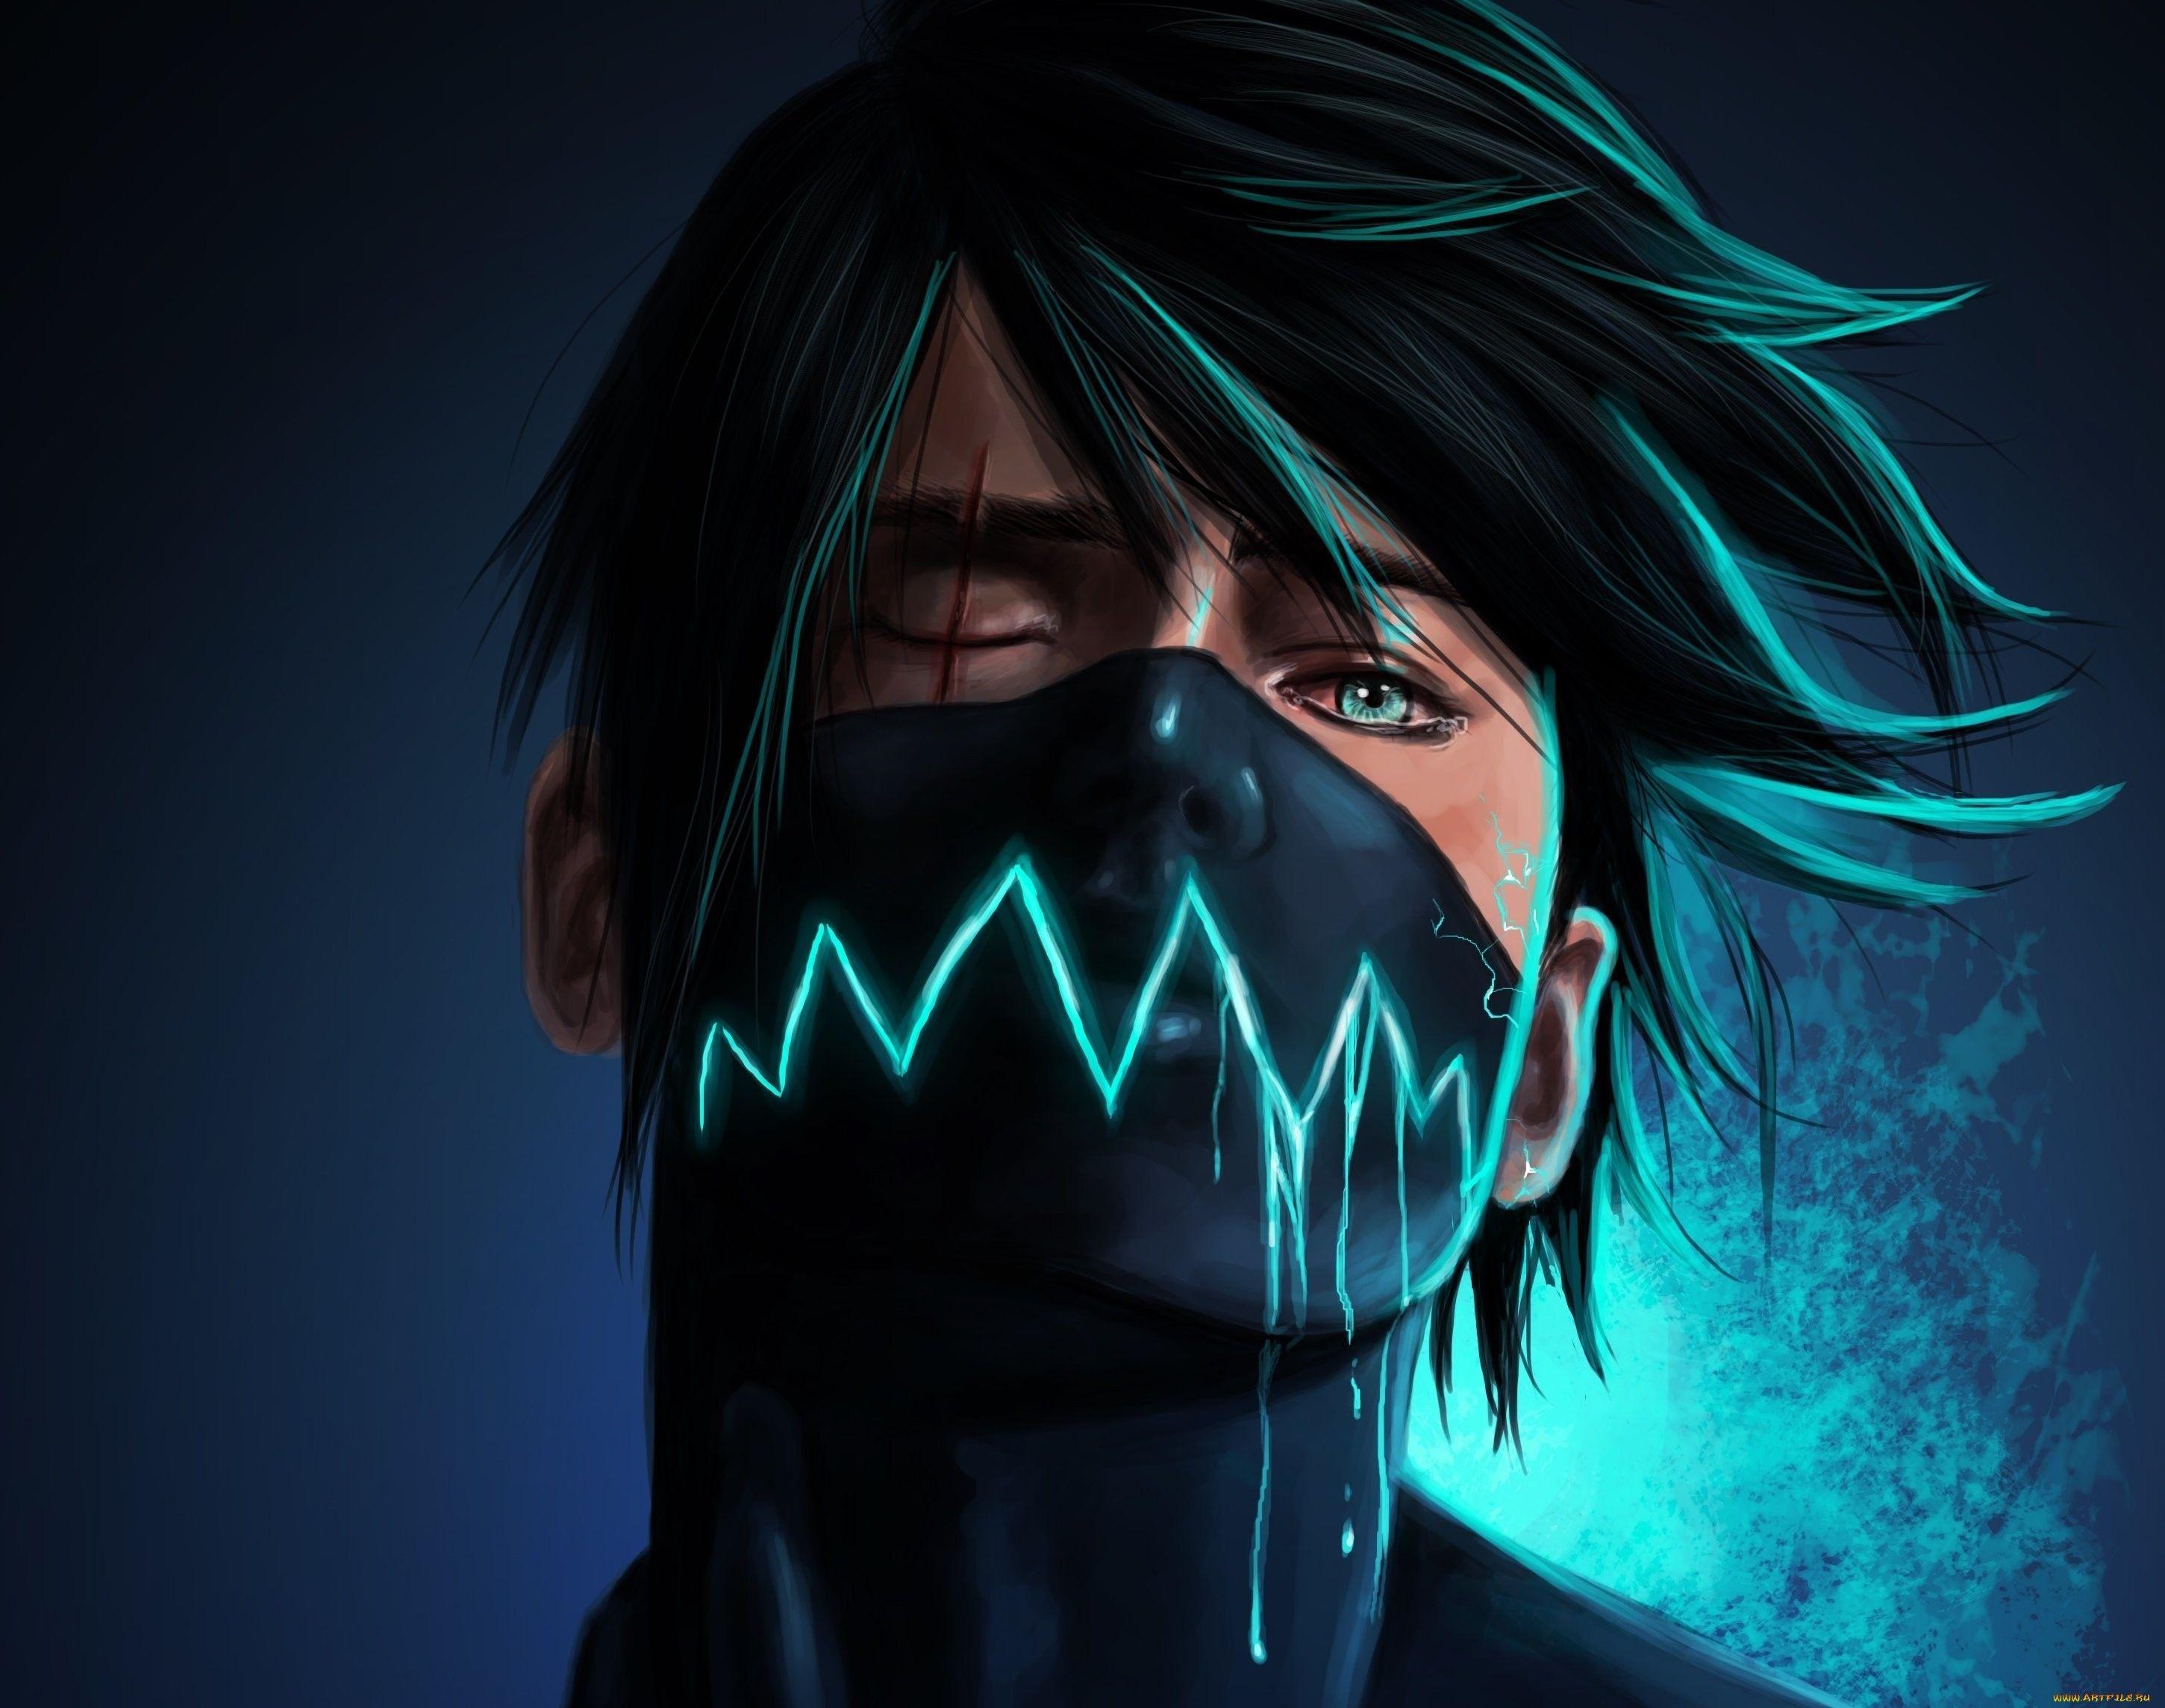 ArtStation - Cool anime wallpapers & great for profile pic <3 | Artworks